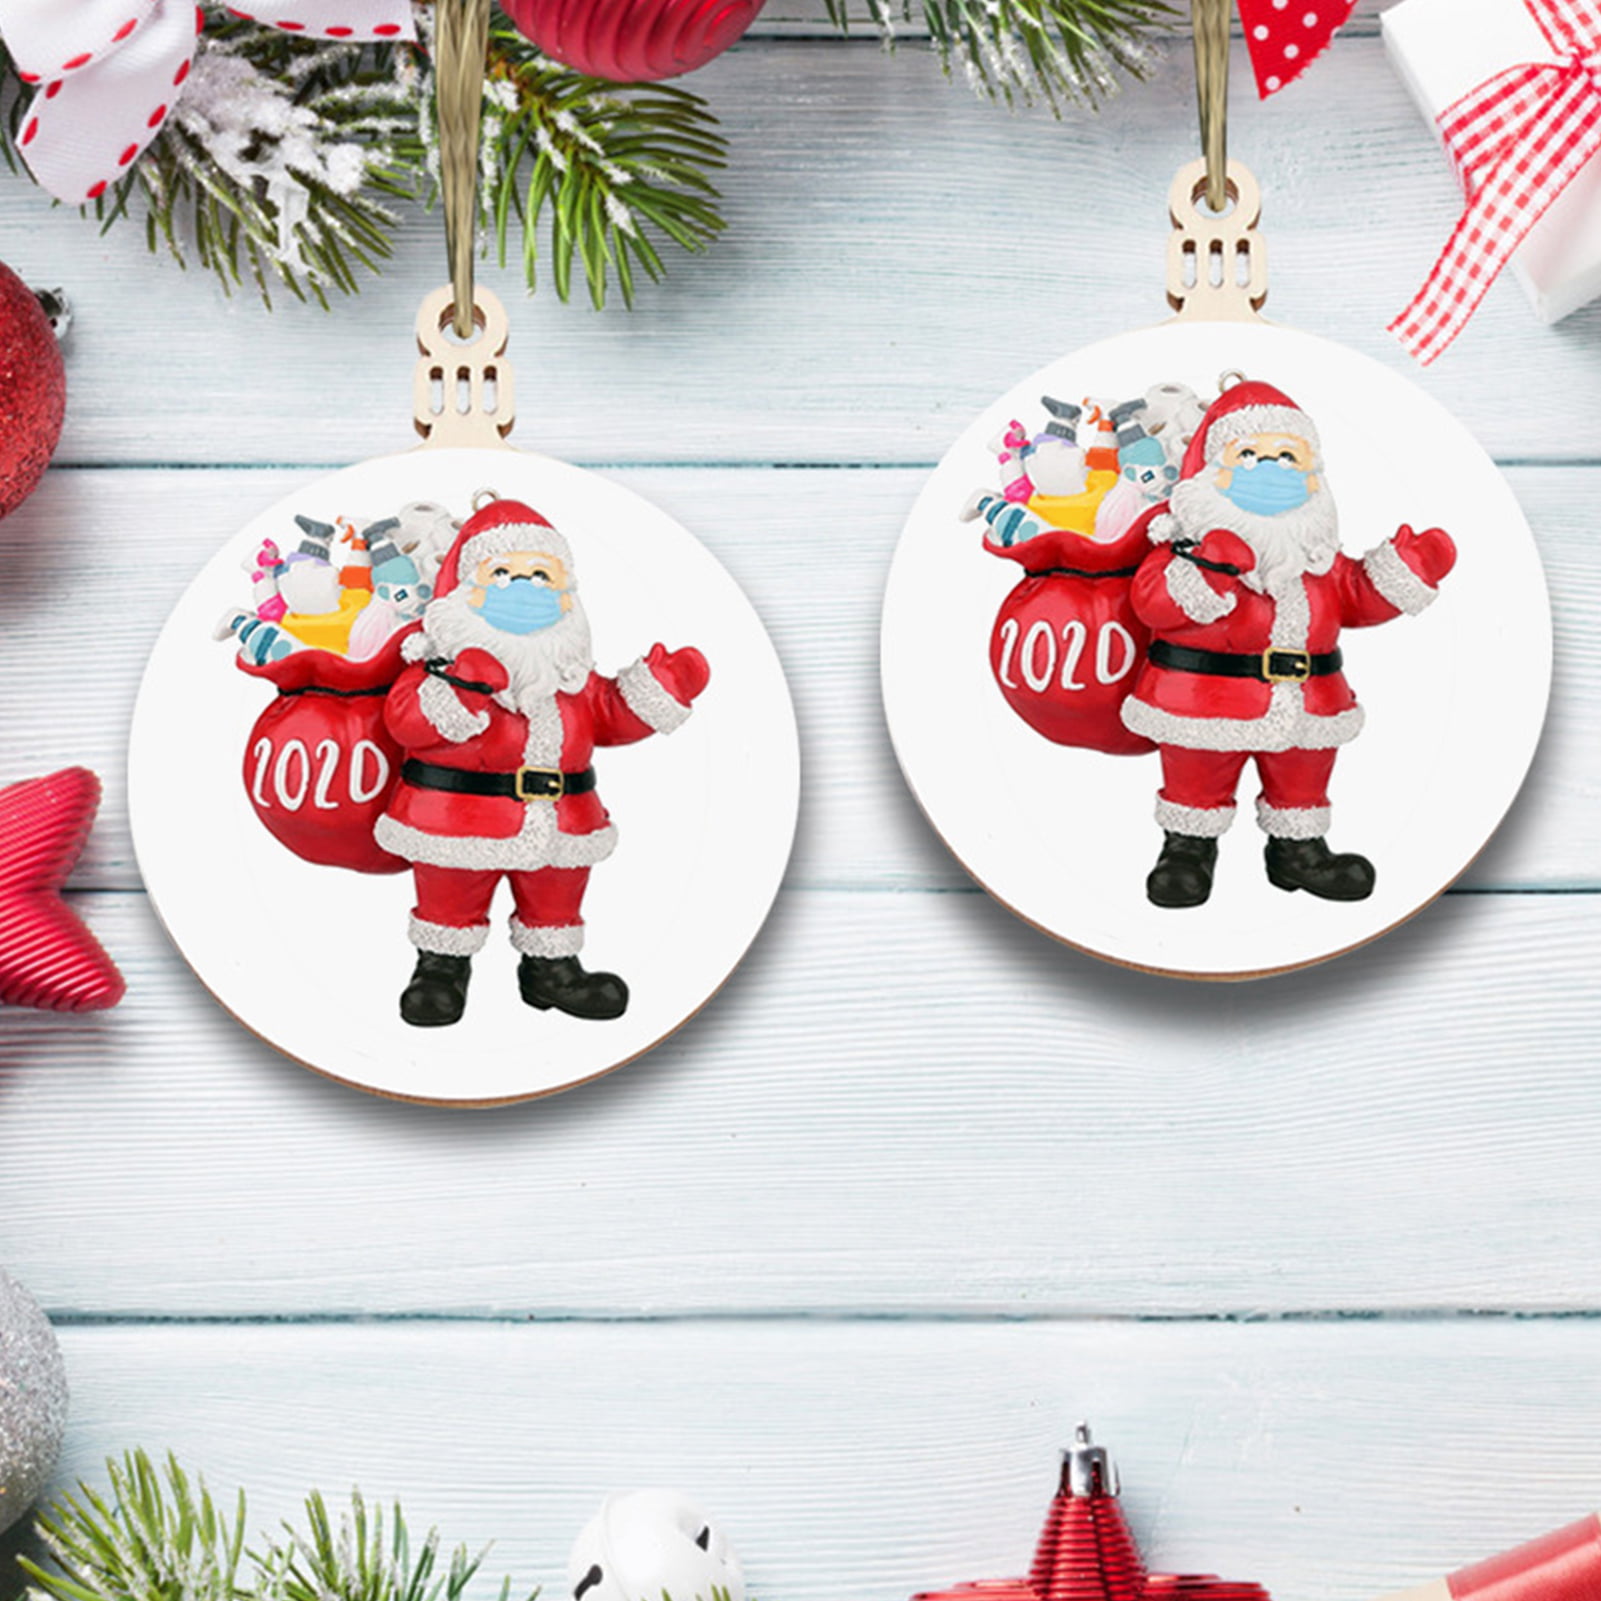 Details about   Home Decor Xmas Hanging Santa Claus Decoration Christmas Tree Tag Gifts Label 